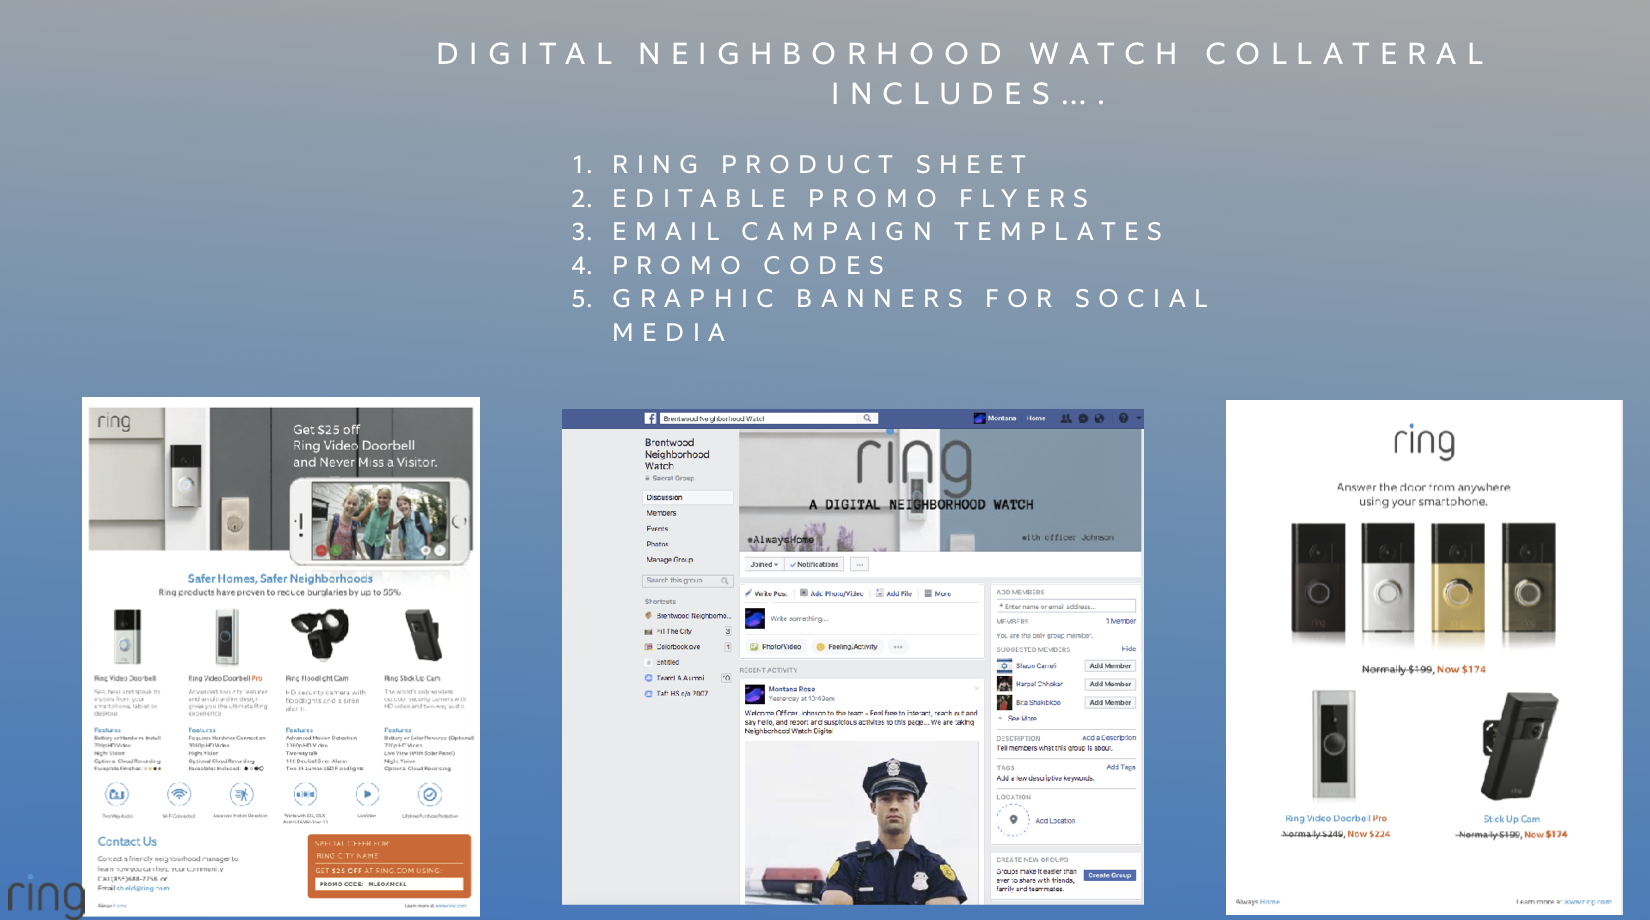 Image: Slide 12 of the Digital Neighborhood Watch document obtained by Motherboard.